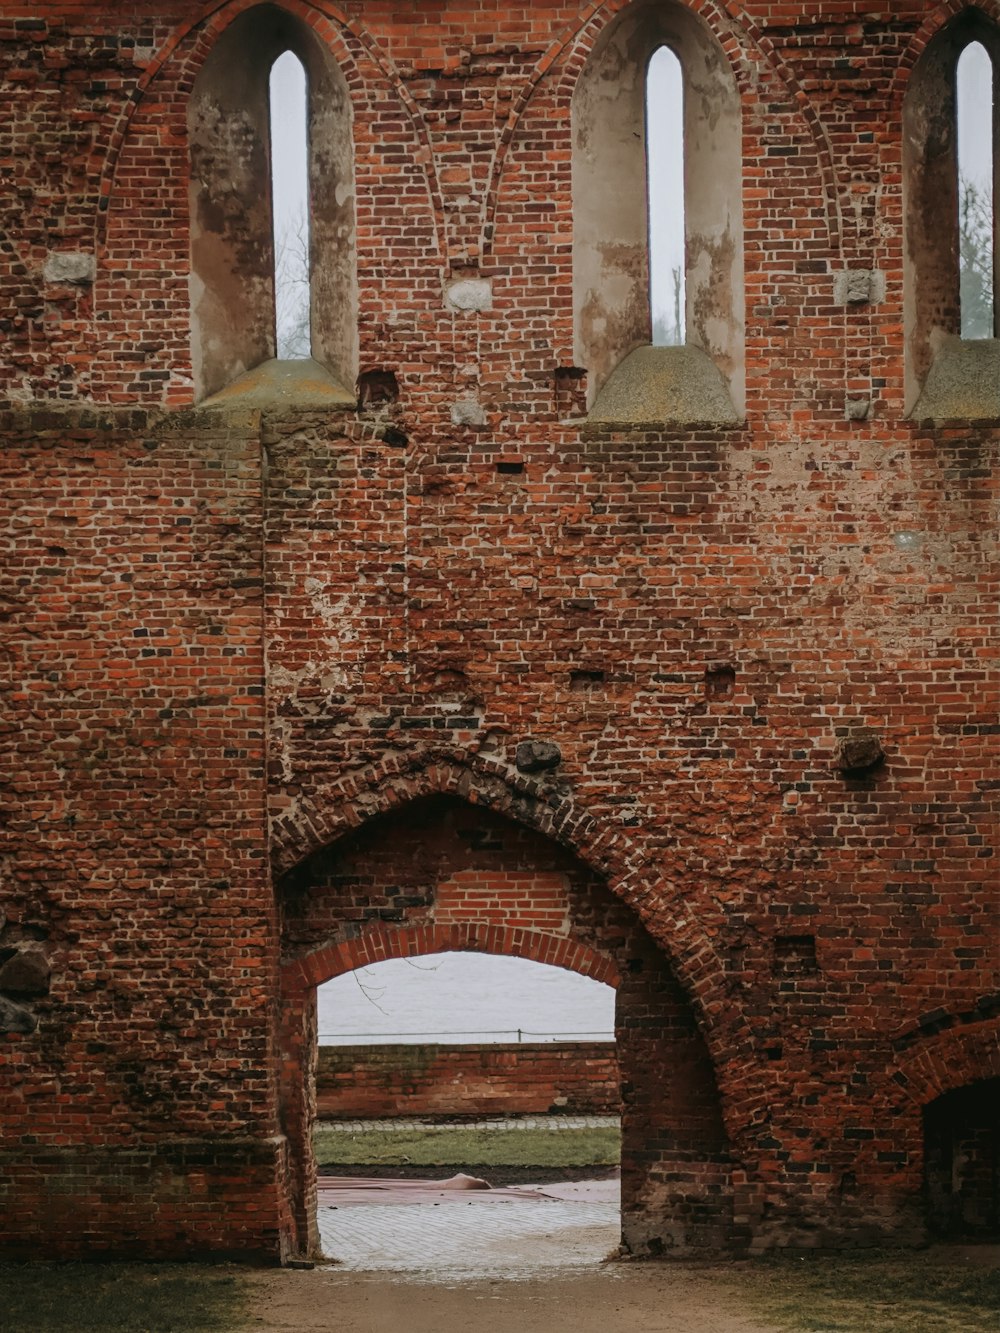 an old brick building with two arched windows